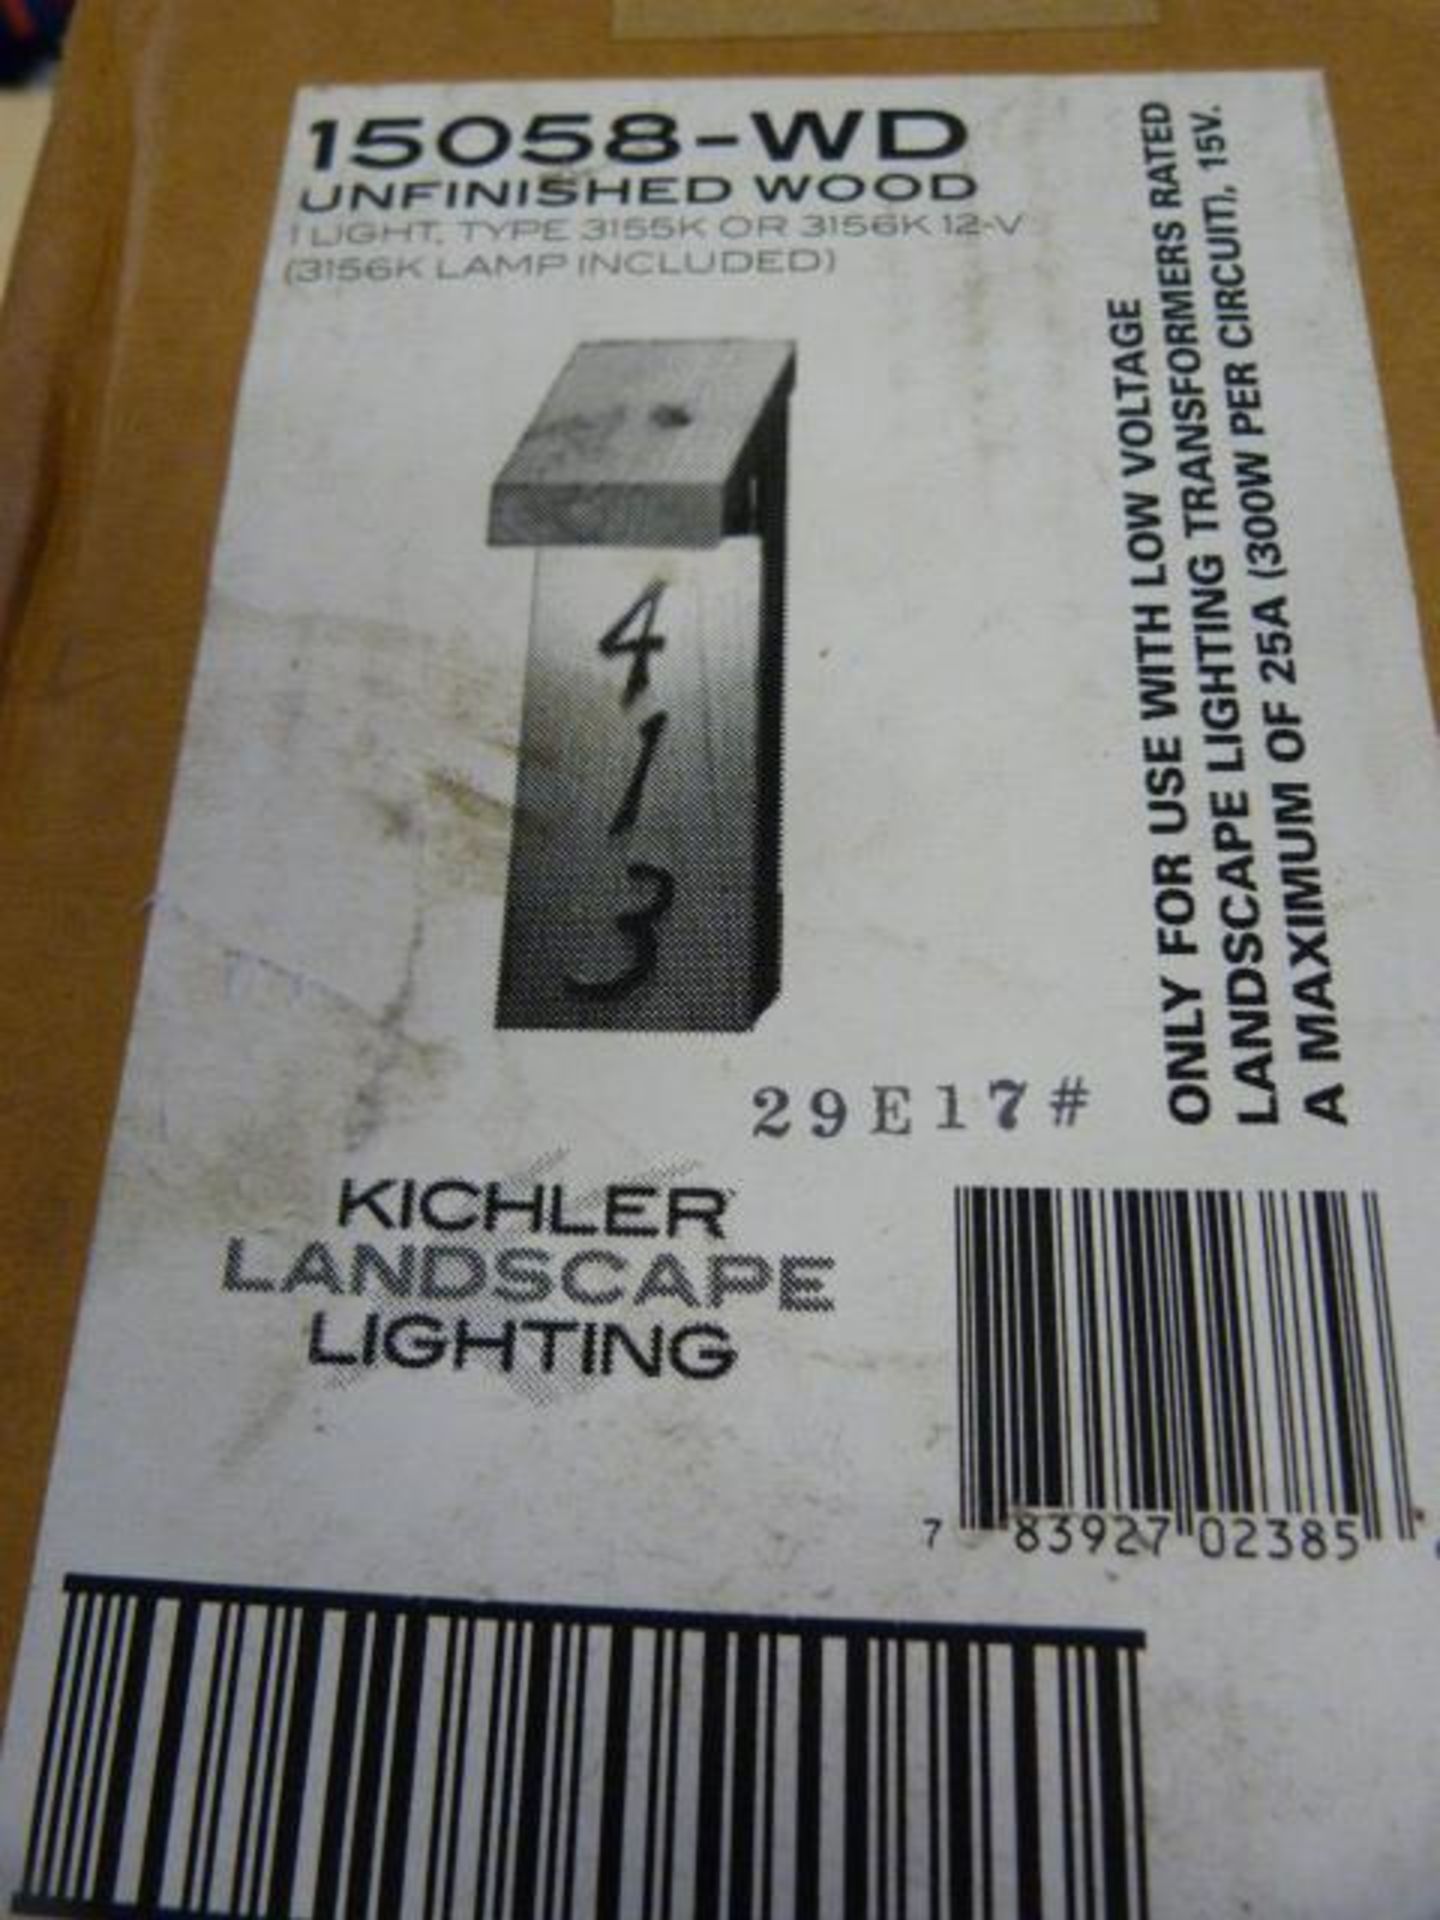 *15058-WD Unfinished Wood Light Fitting